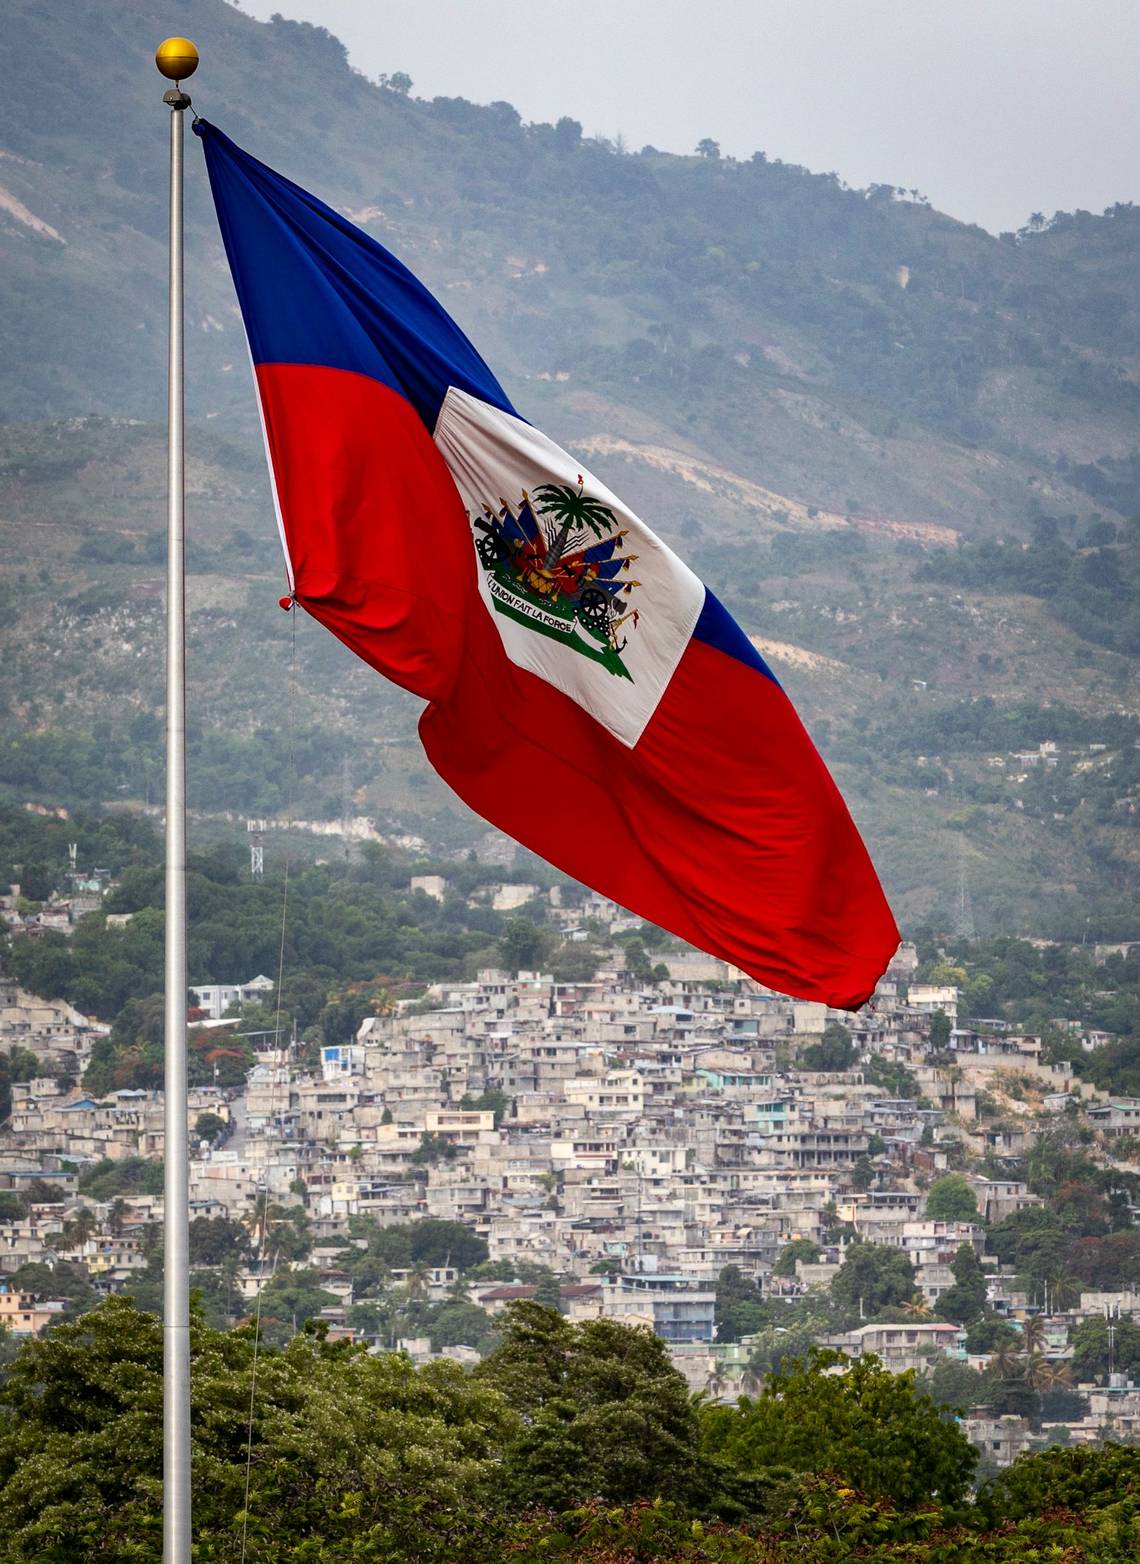 While celebrating Haitian heritage, don’t forget Haiti is in crisis thanks to American guns | Opinion